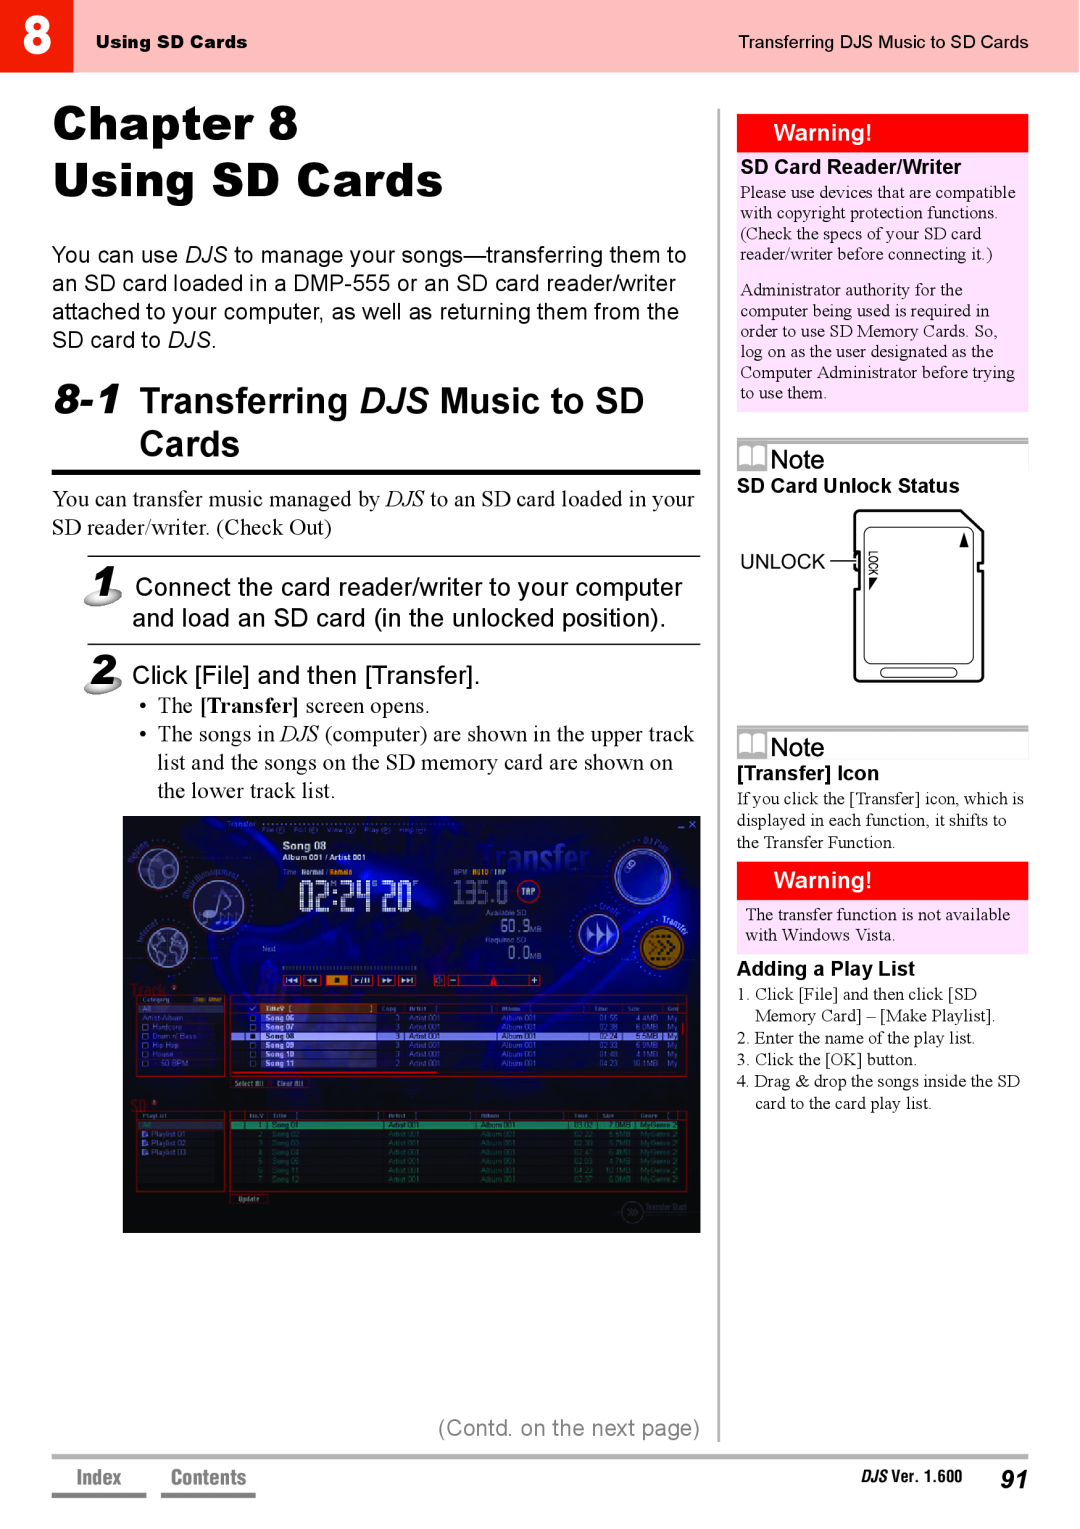 Pioneer SVJ-DS01D, SVJ-DL01 manual Chapter Using SD Cards, Transferring DJS Music to SD Cards, Click File and then Transfer 